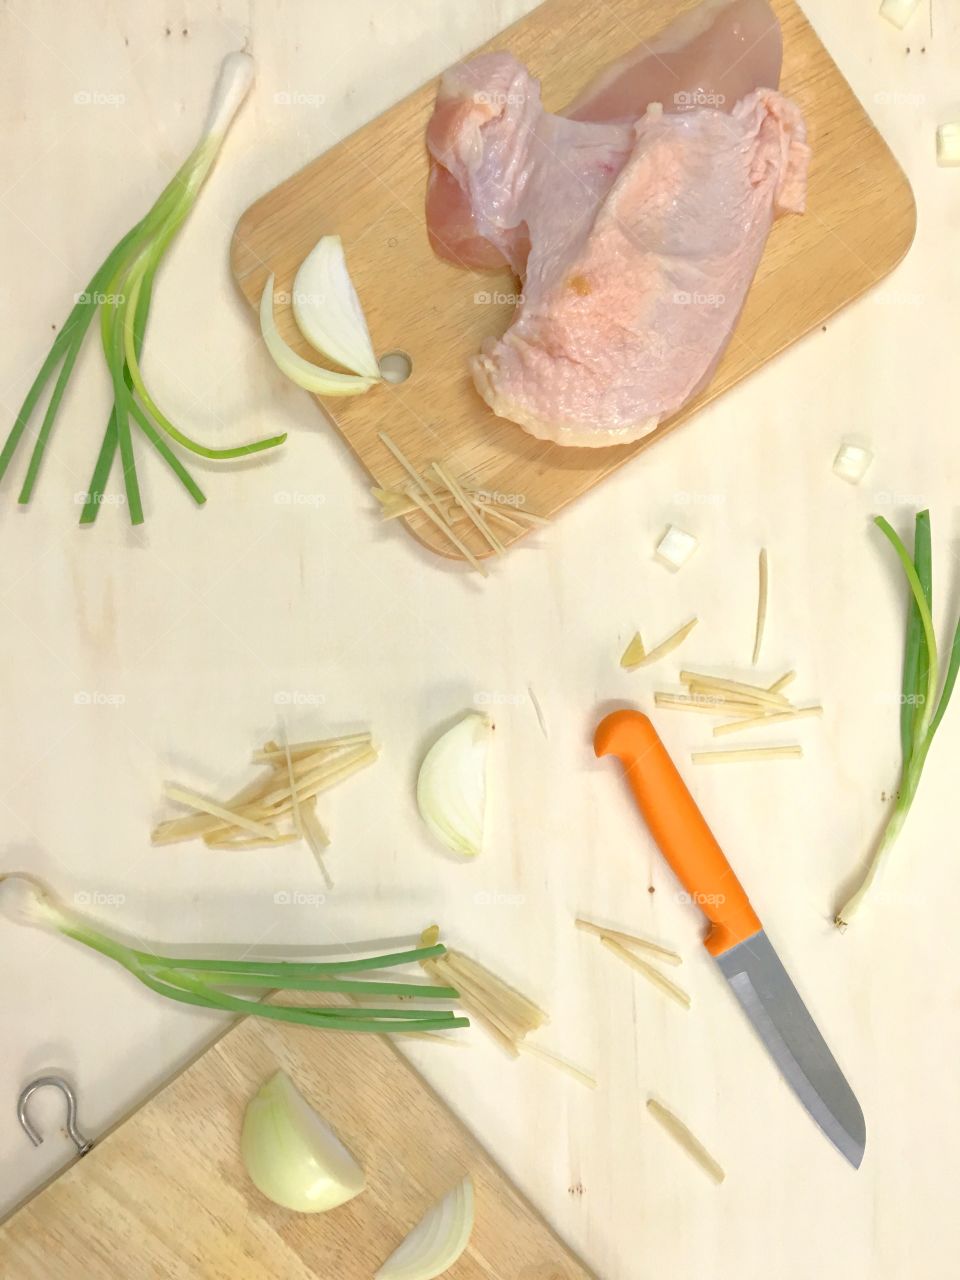 Preparing chicken for cooking